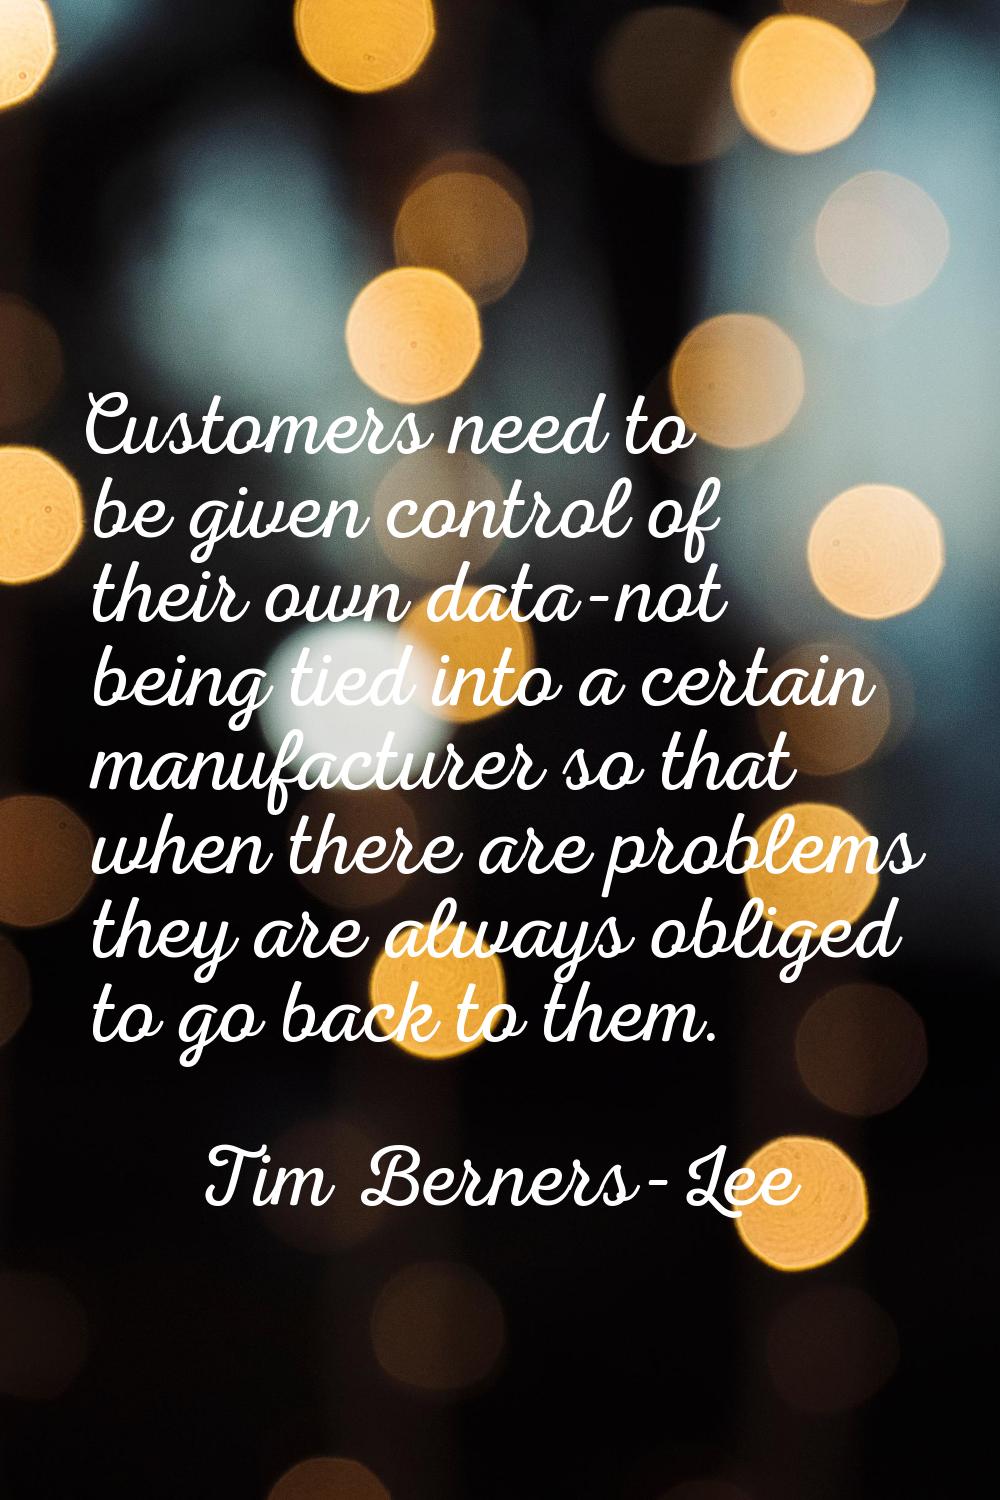 Customers need to be given control of their own data-not being tied into a certain manufacturer so 